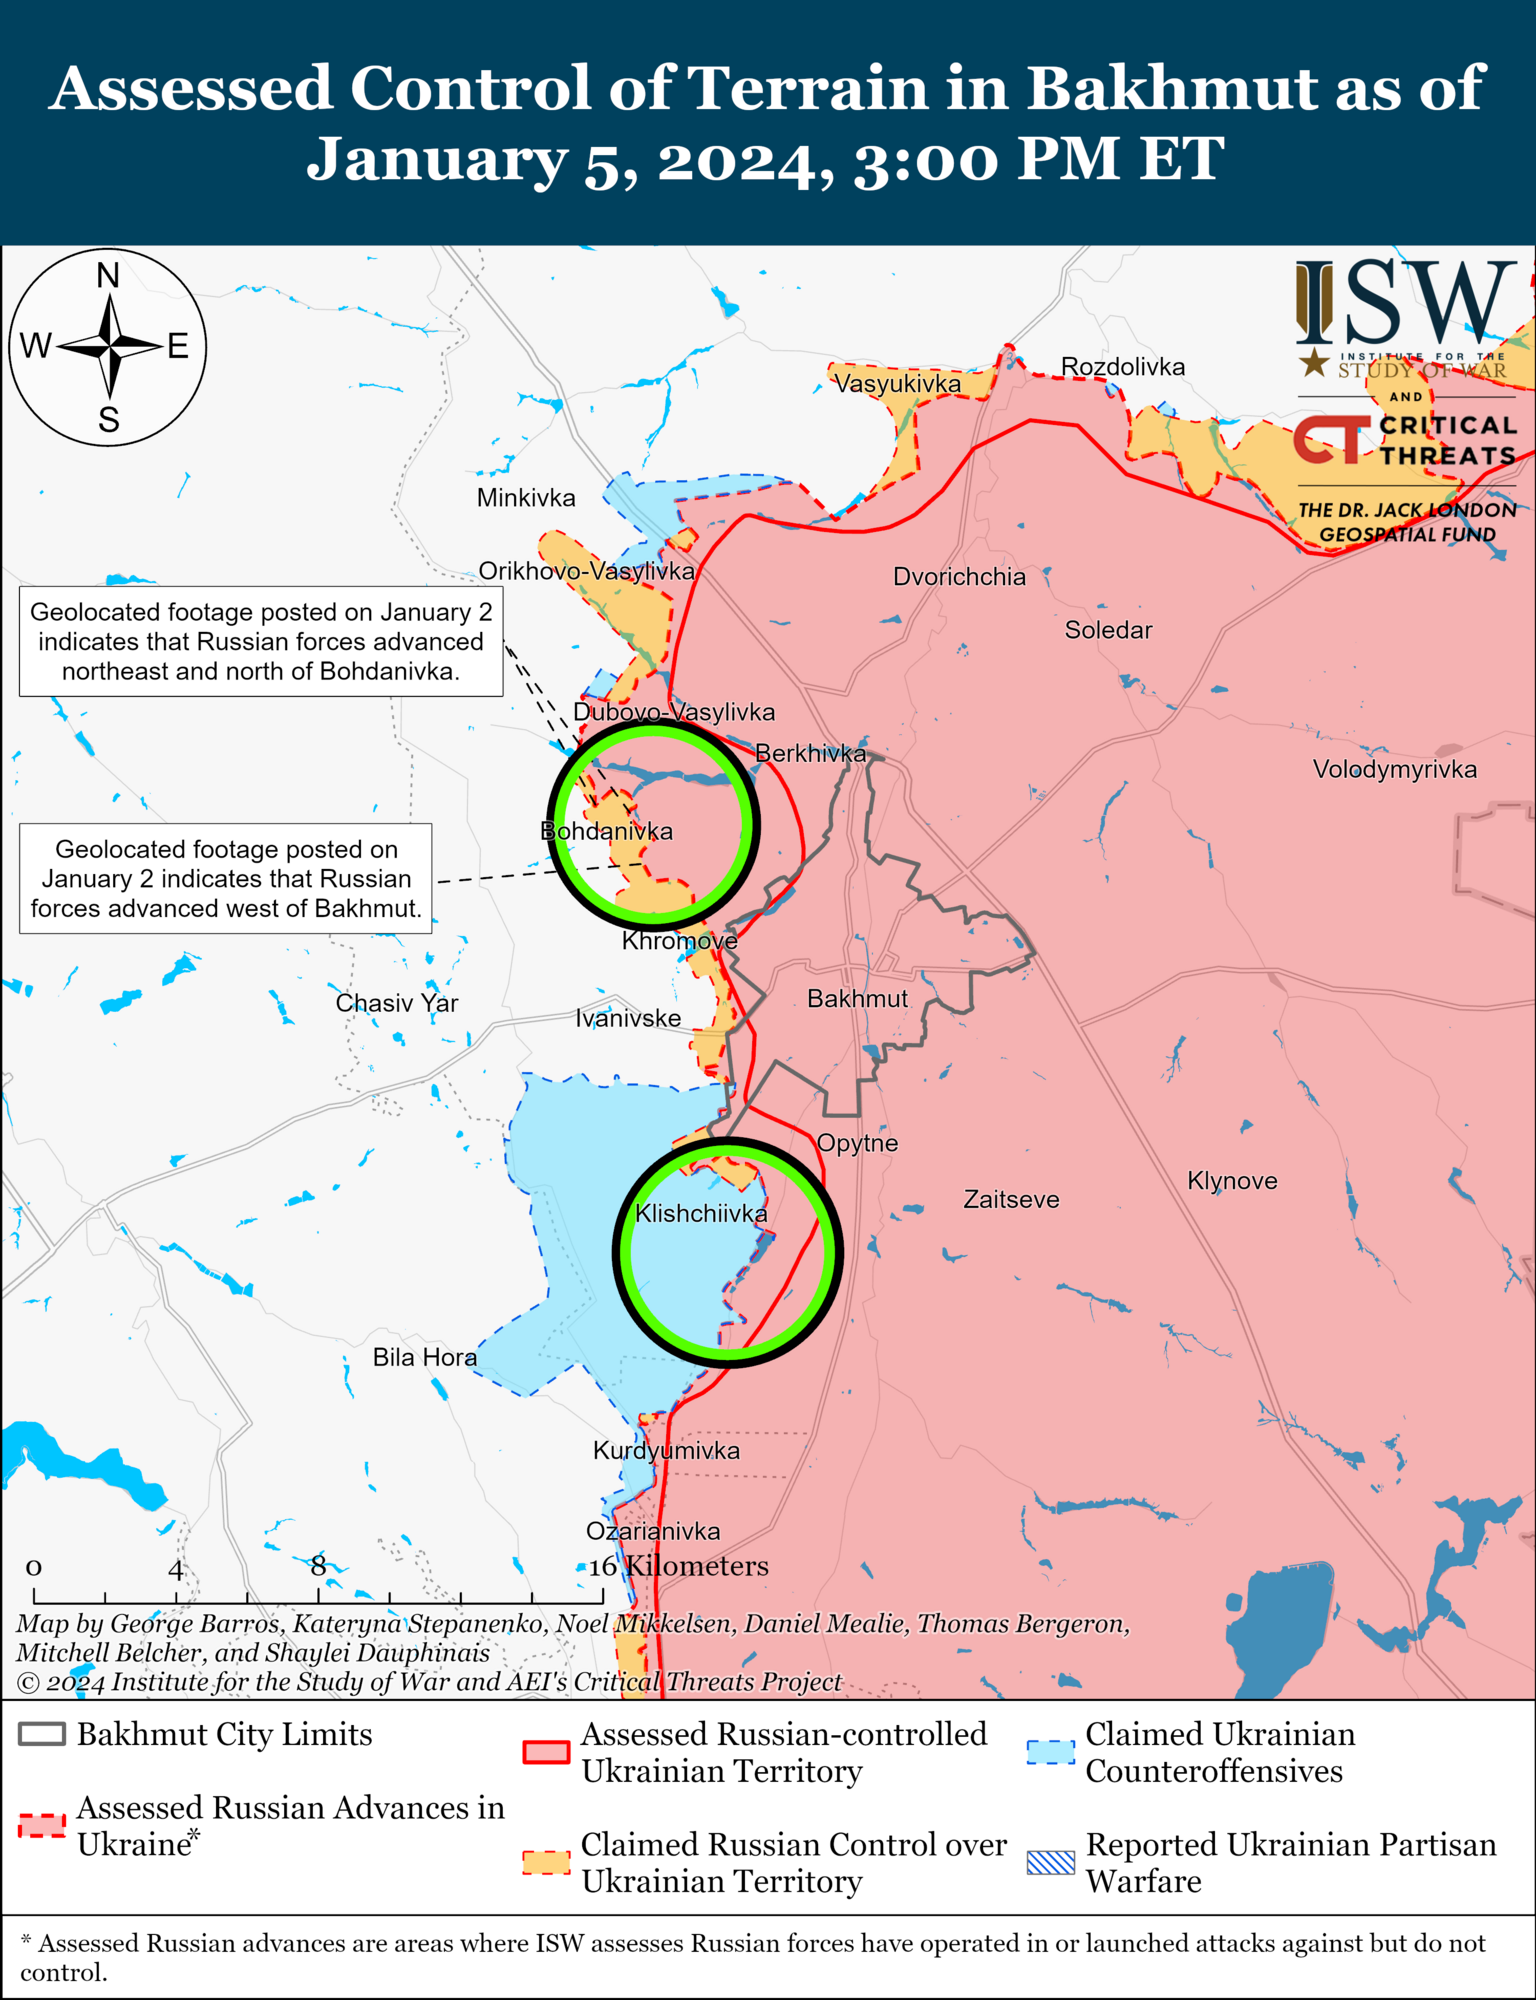 Positional fighting continues near Bakhmut, Russian troops slightly advance near Avdiivka: analysis from ISW